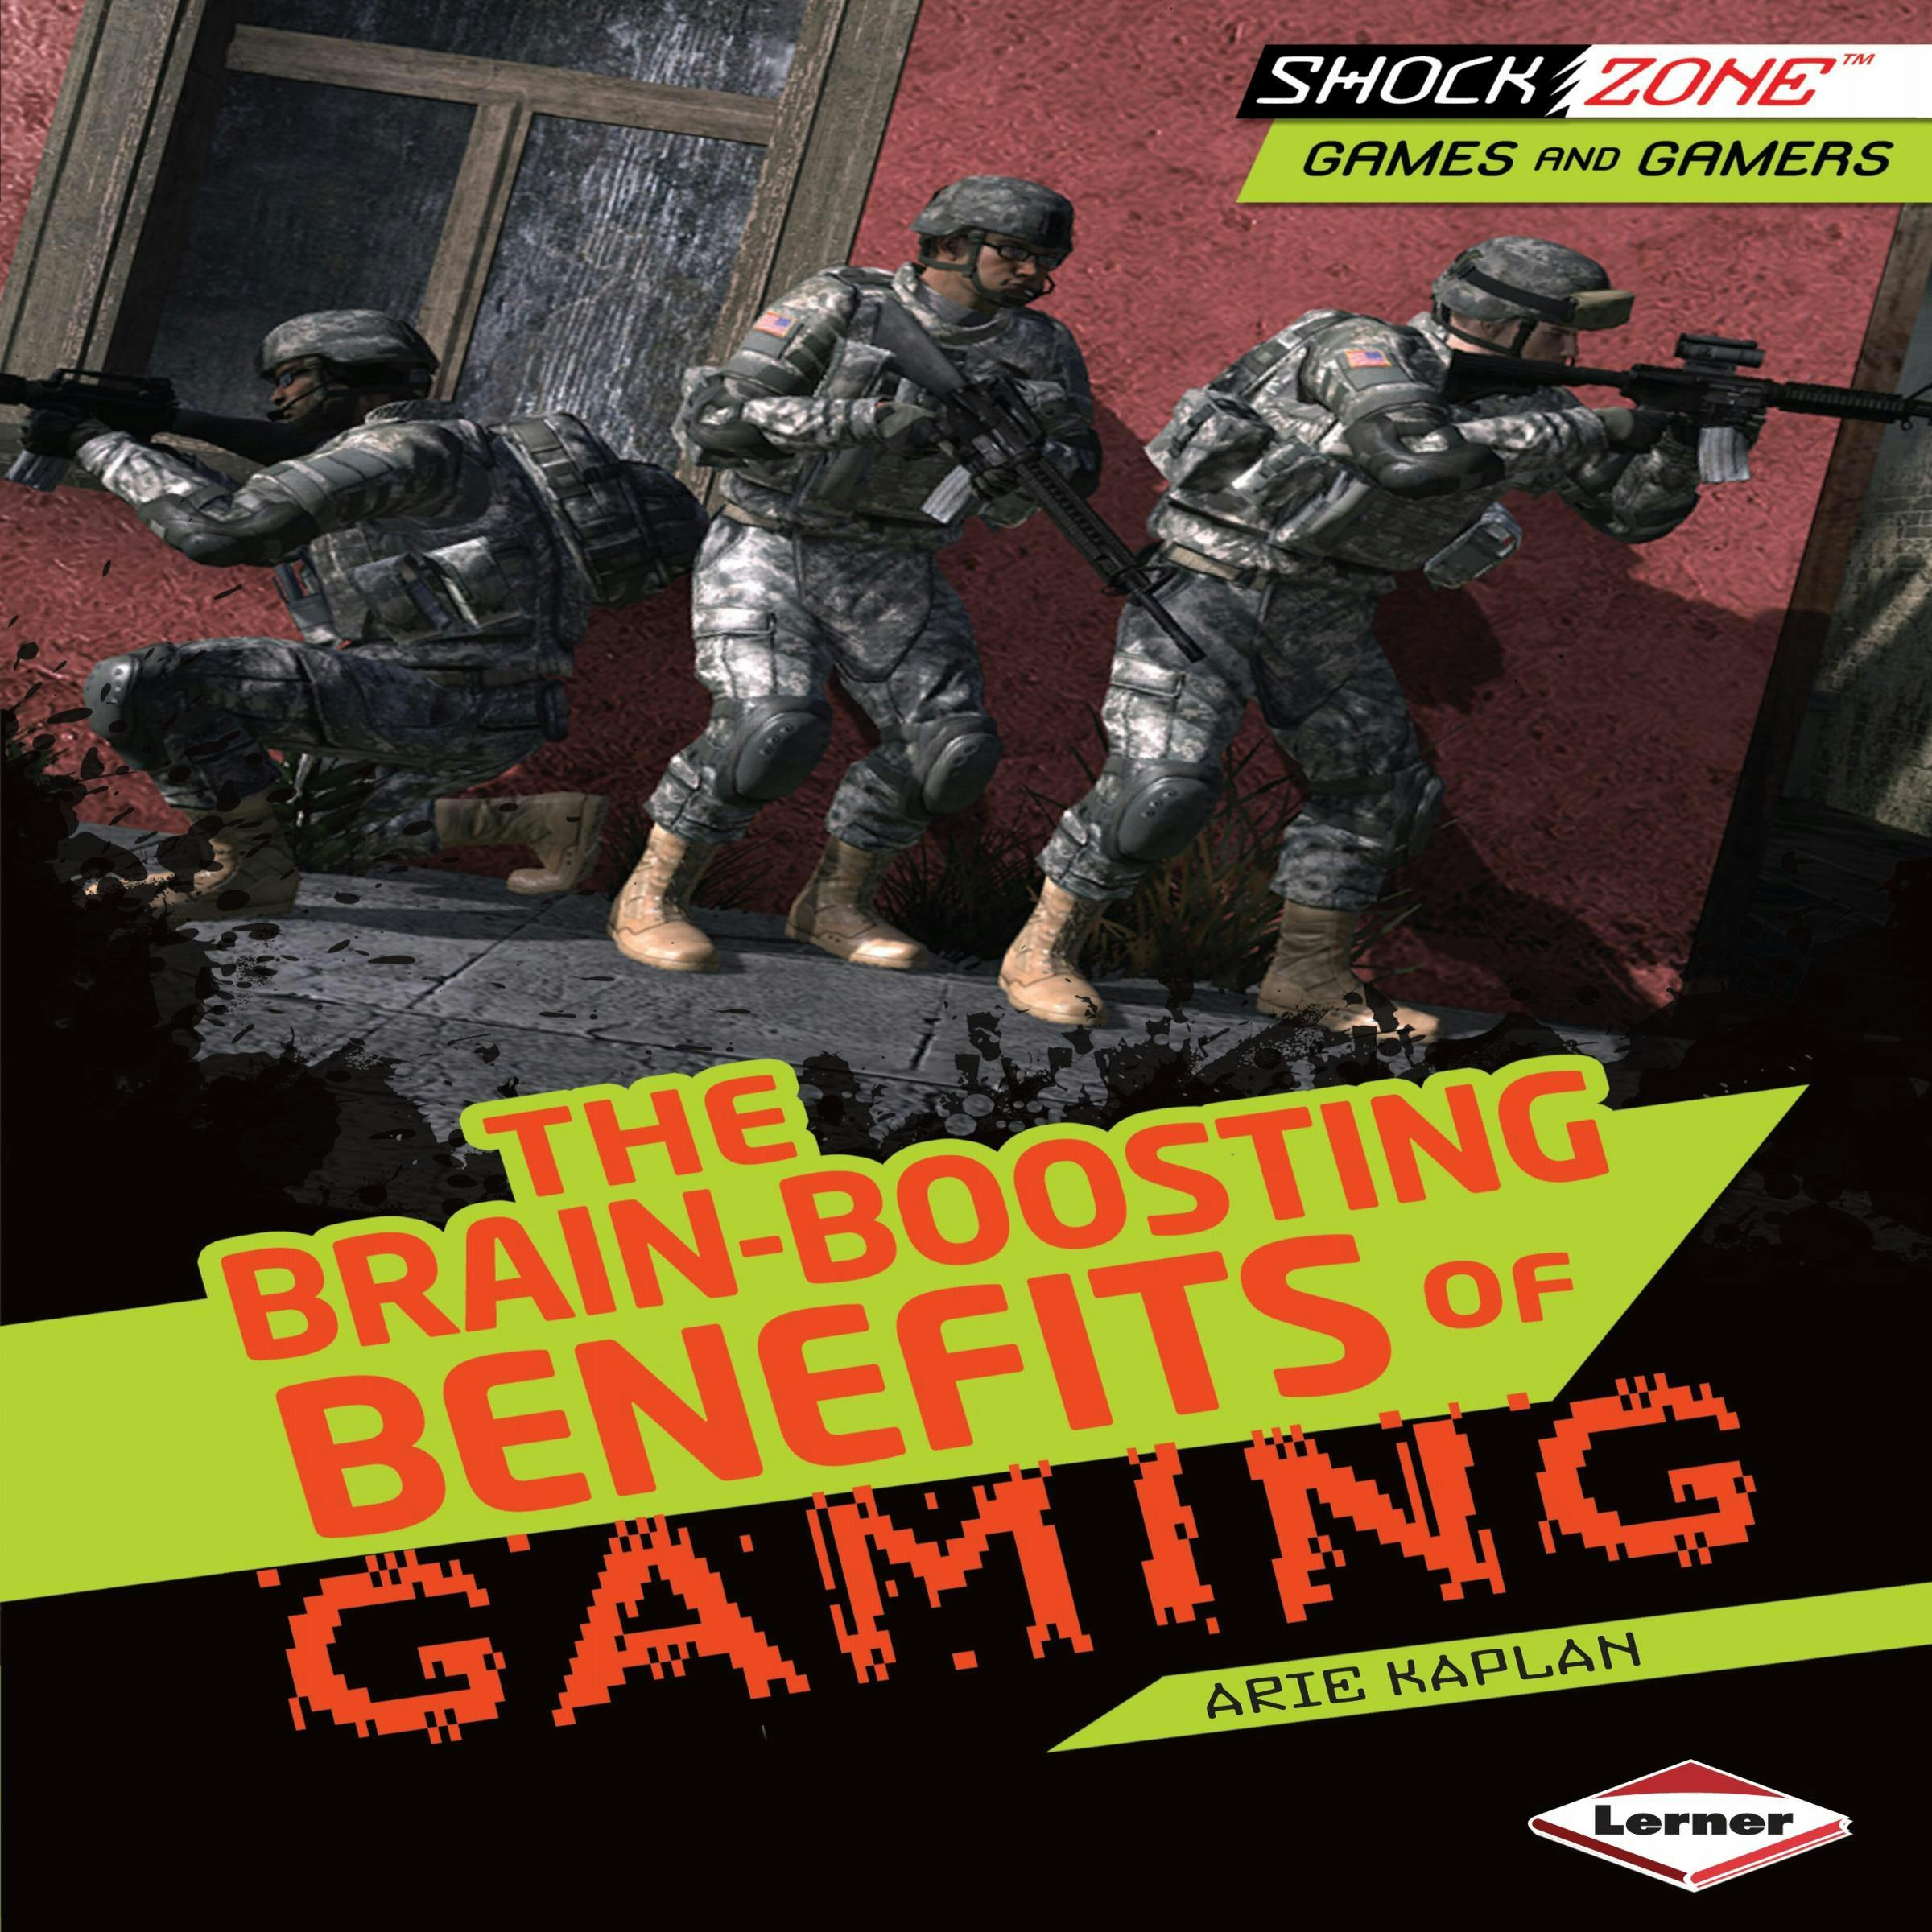 The Brain-Boosting Benefits of Gaming - undefined